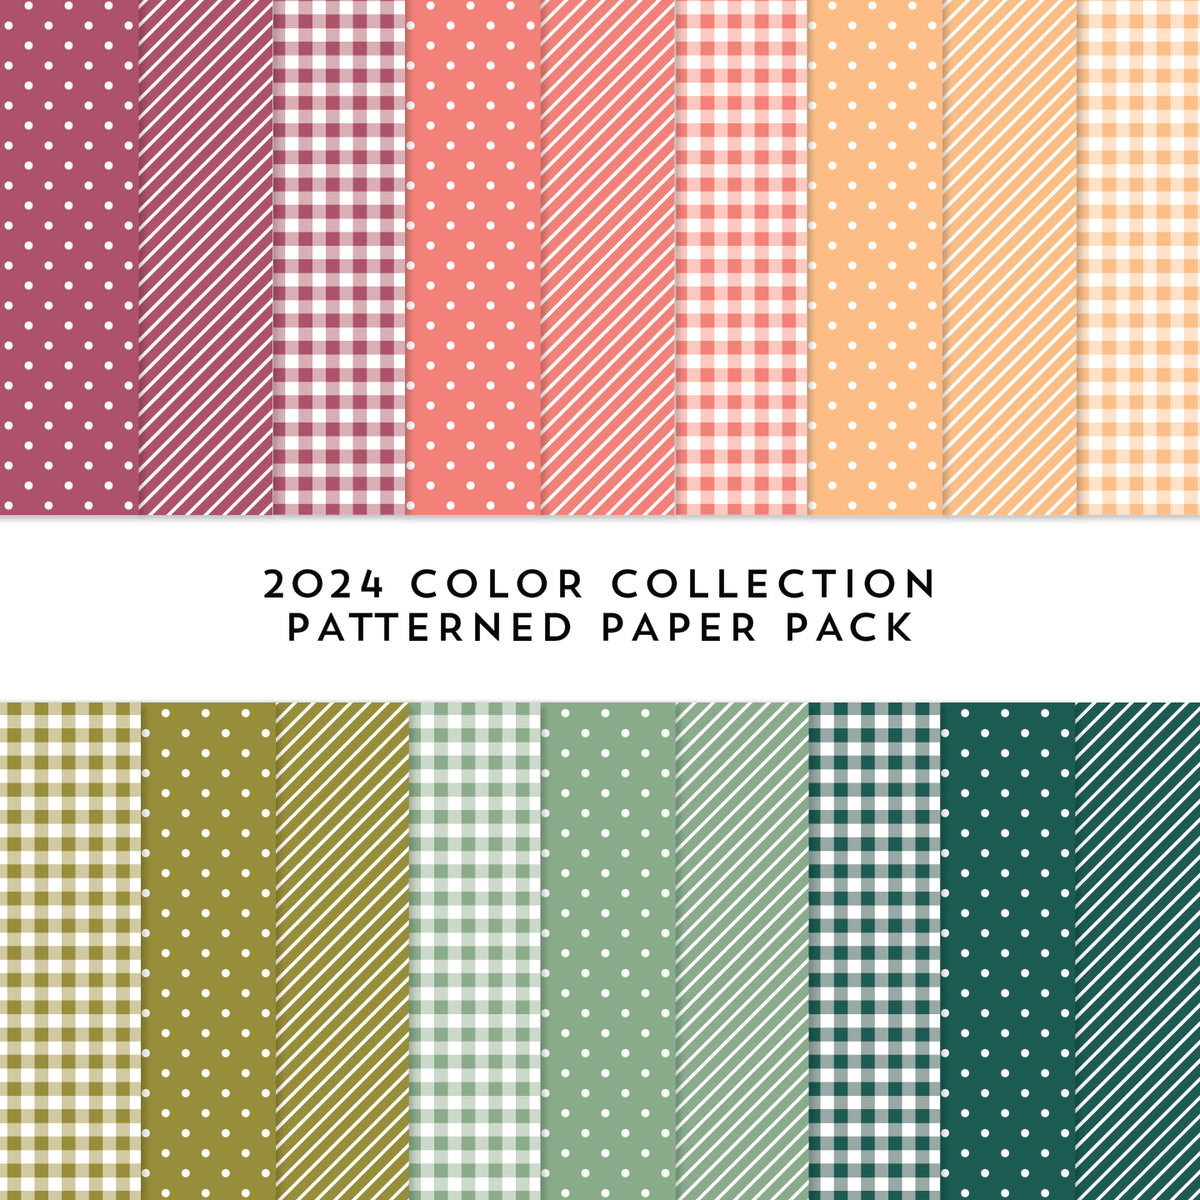 2024 Color Collection Patterned Paper Pack